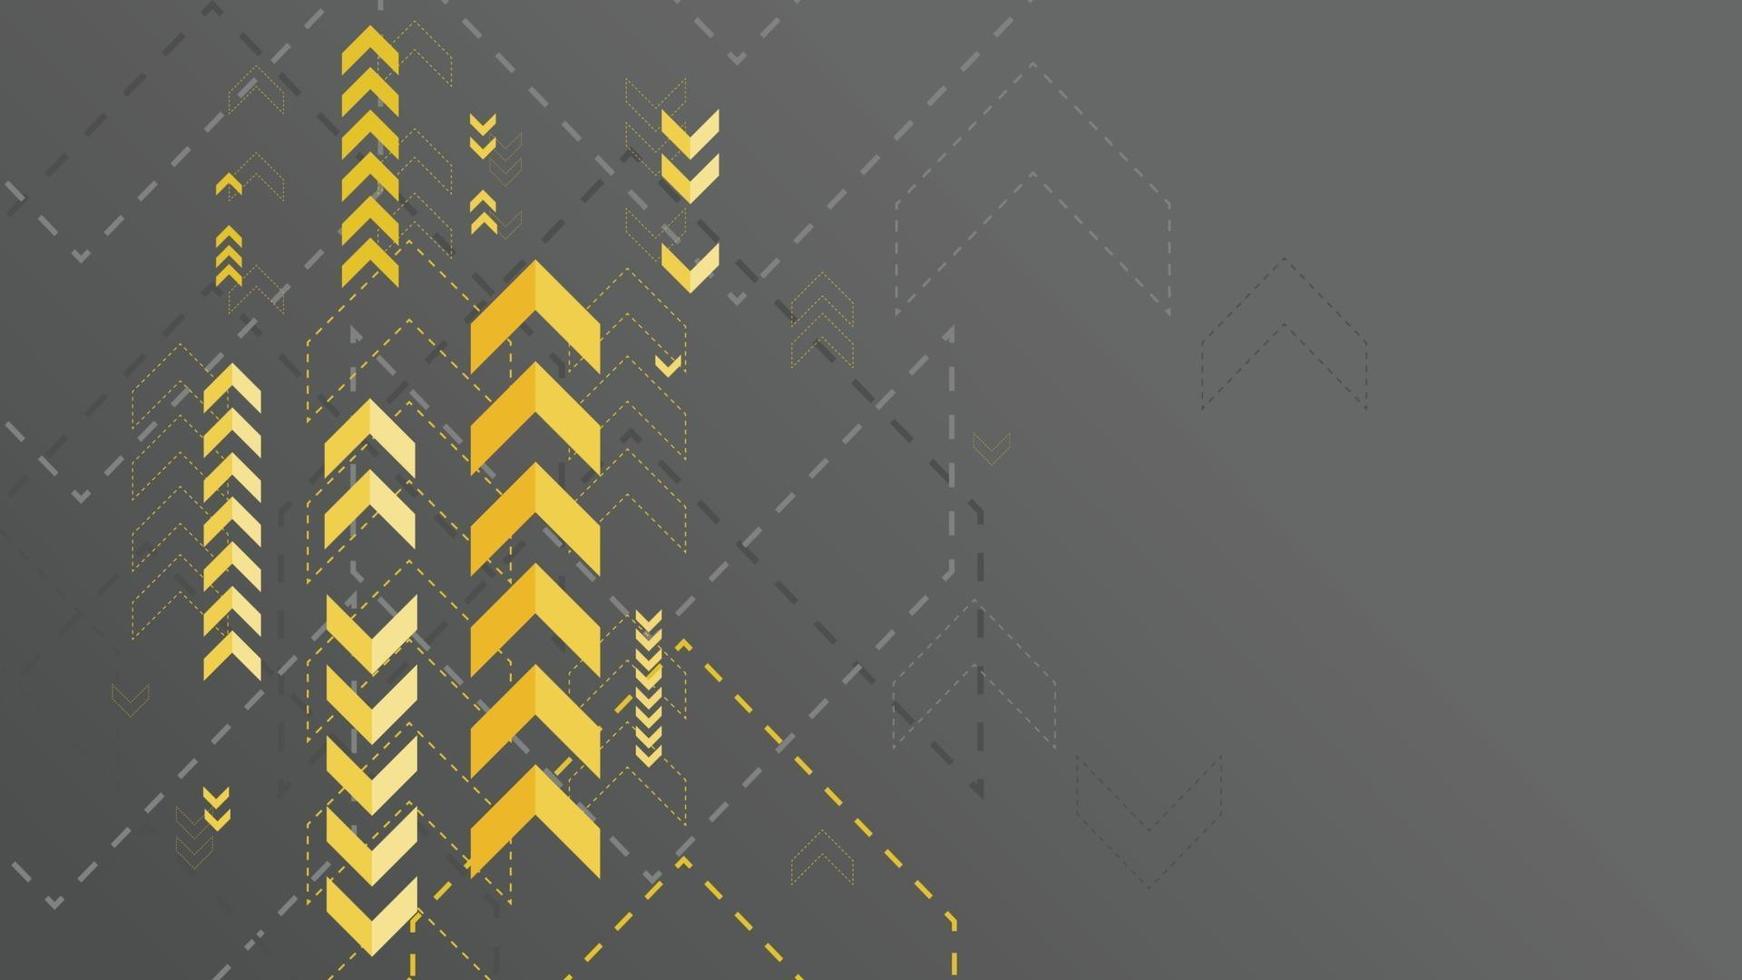 Abstract geometric background with yellow arrows on dark background vector